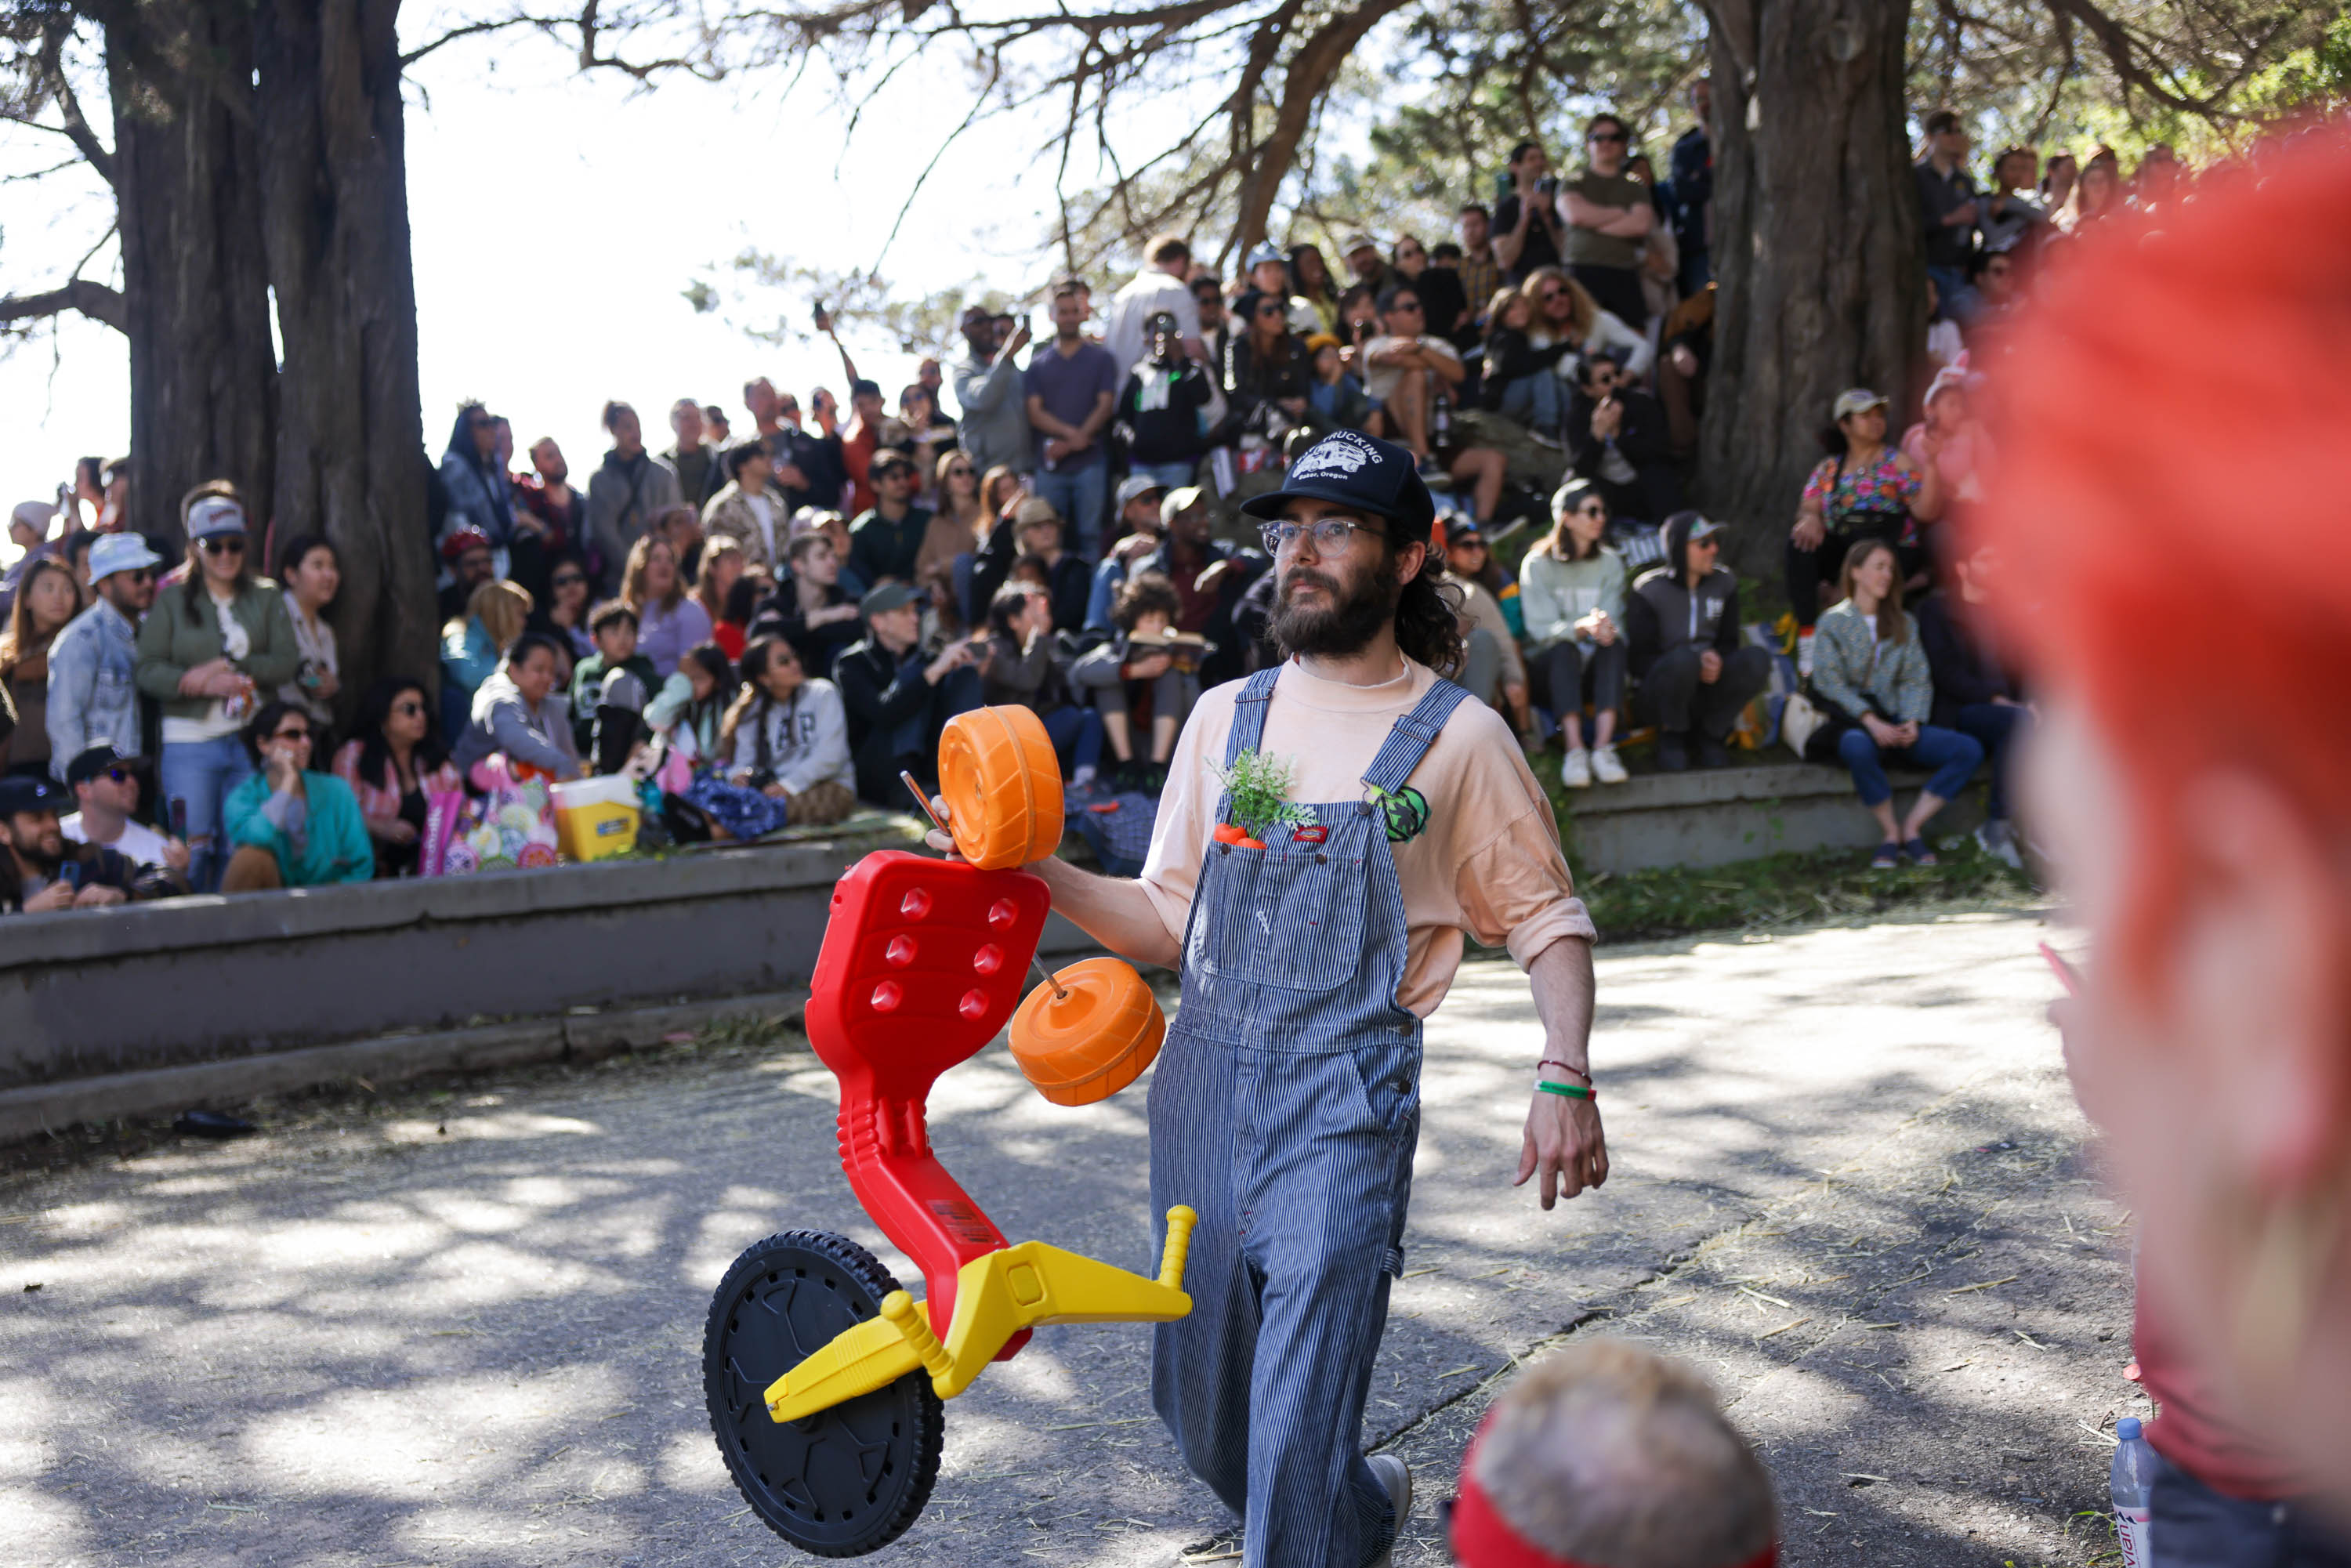 A man in overalls walks with a toy tricycle in front of a crowd outdoors.